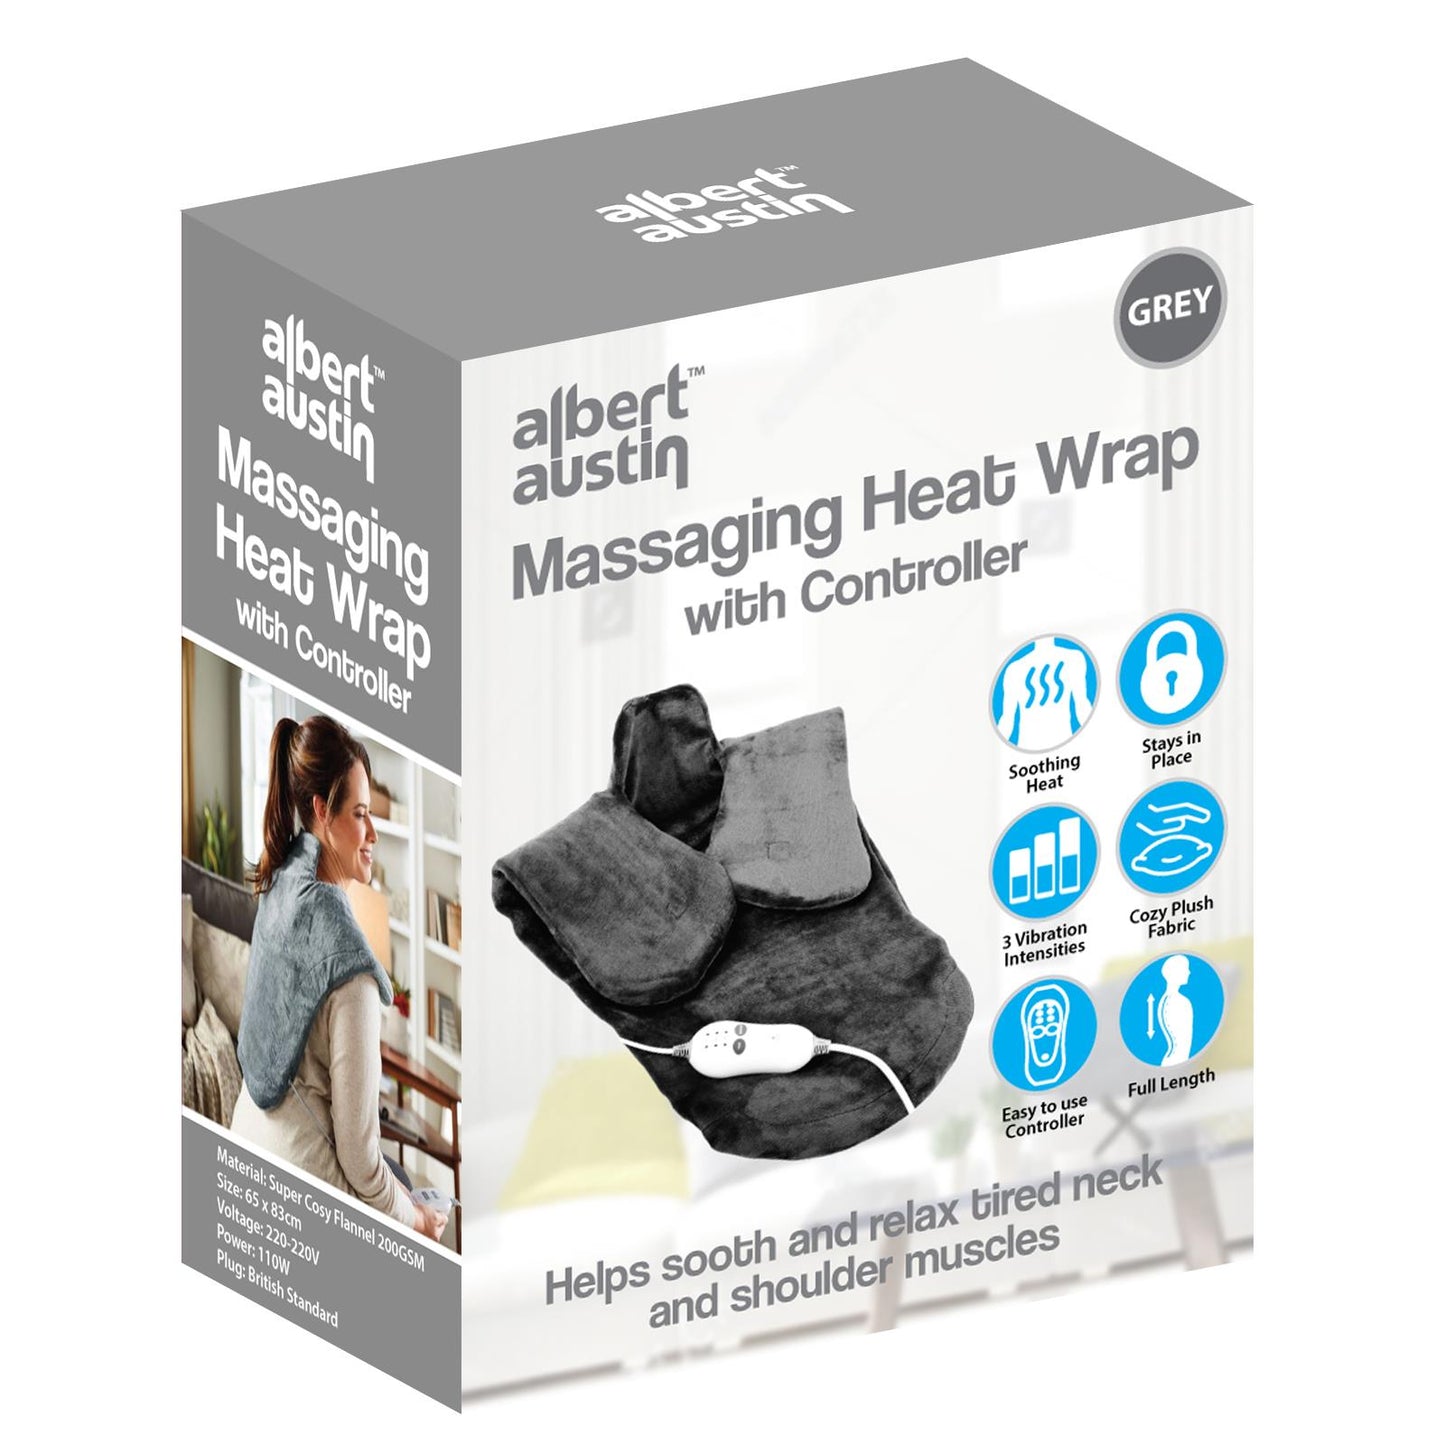 Heating Pad Wrap For Neck And Shoulder Back Pain Relief With An Auto-Off Feature